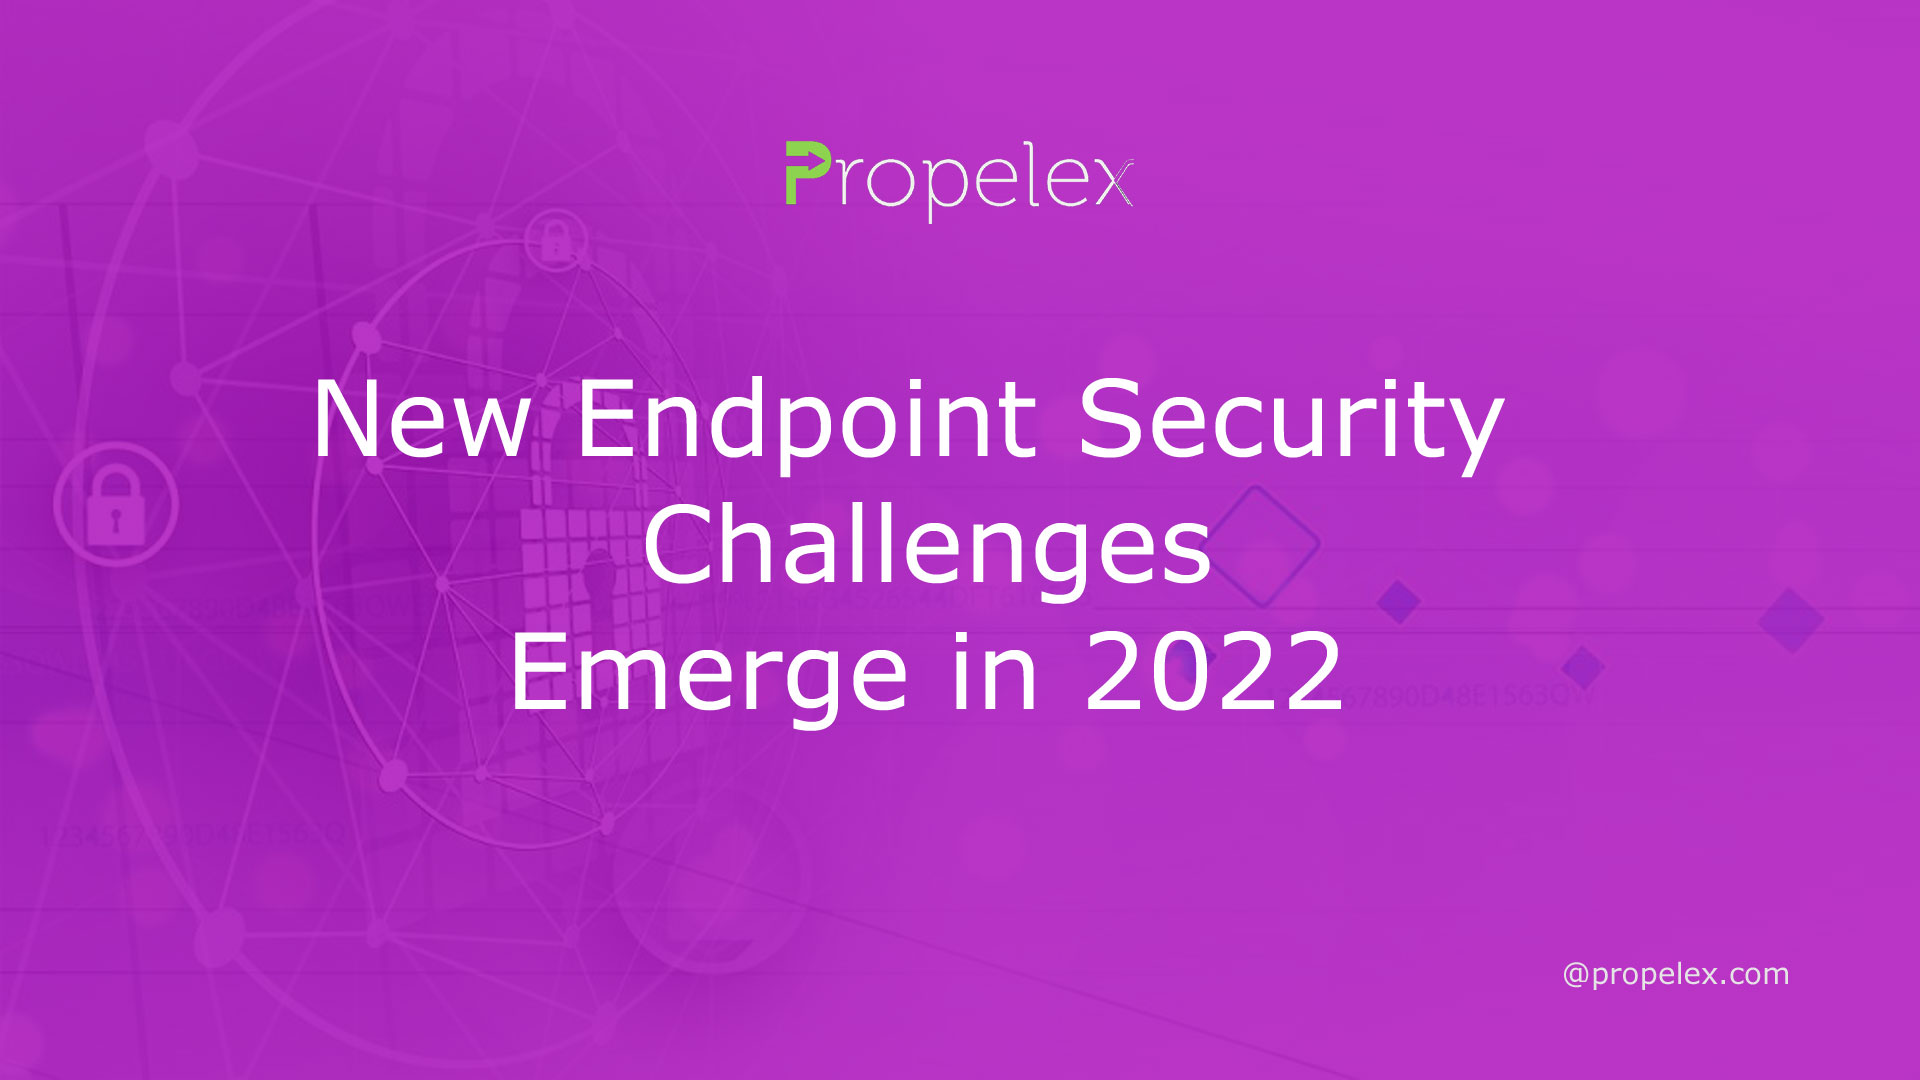 New Endpoint Security Challenges Emerge in 2022